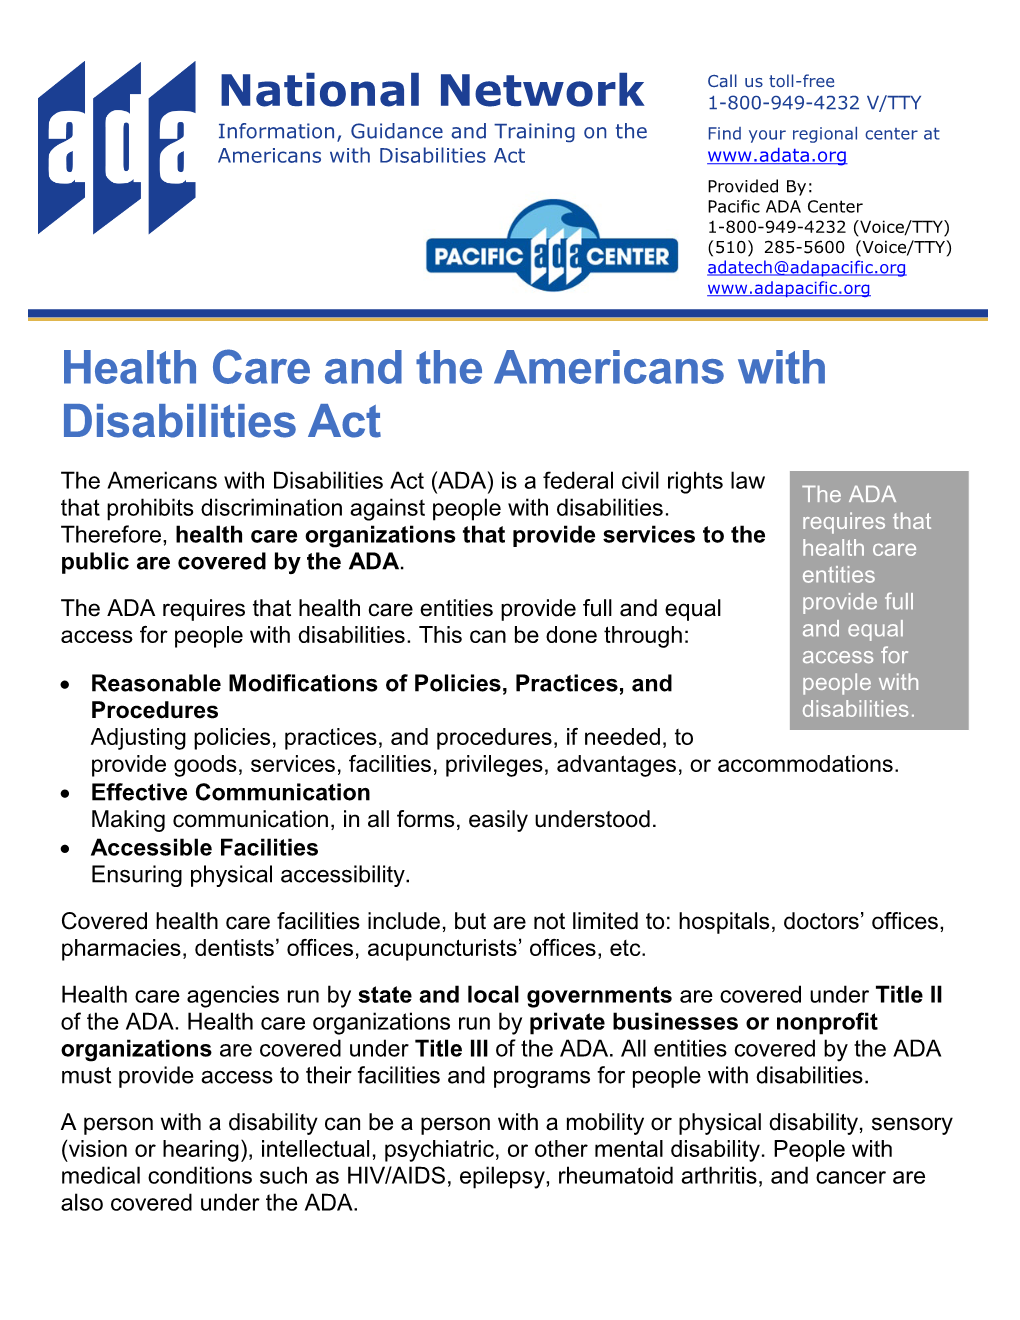 Health Care and the Americans with Disabilities